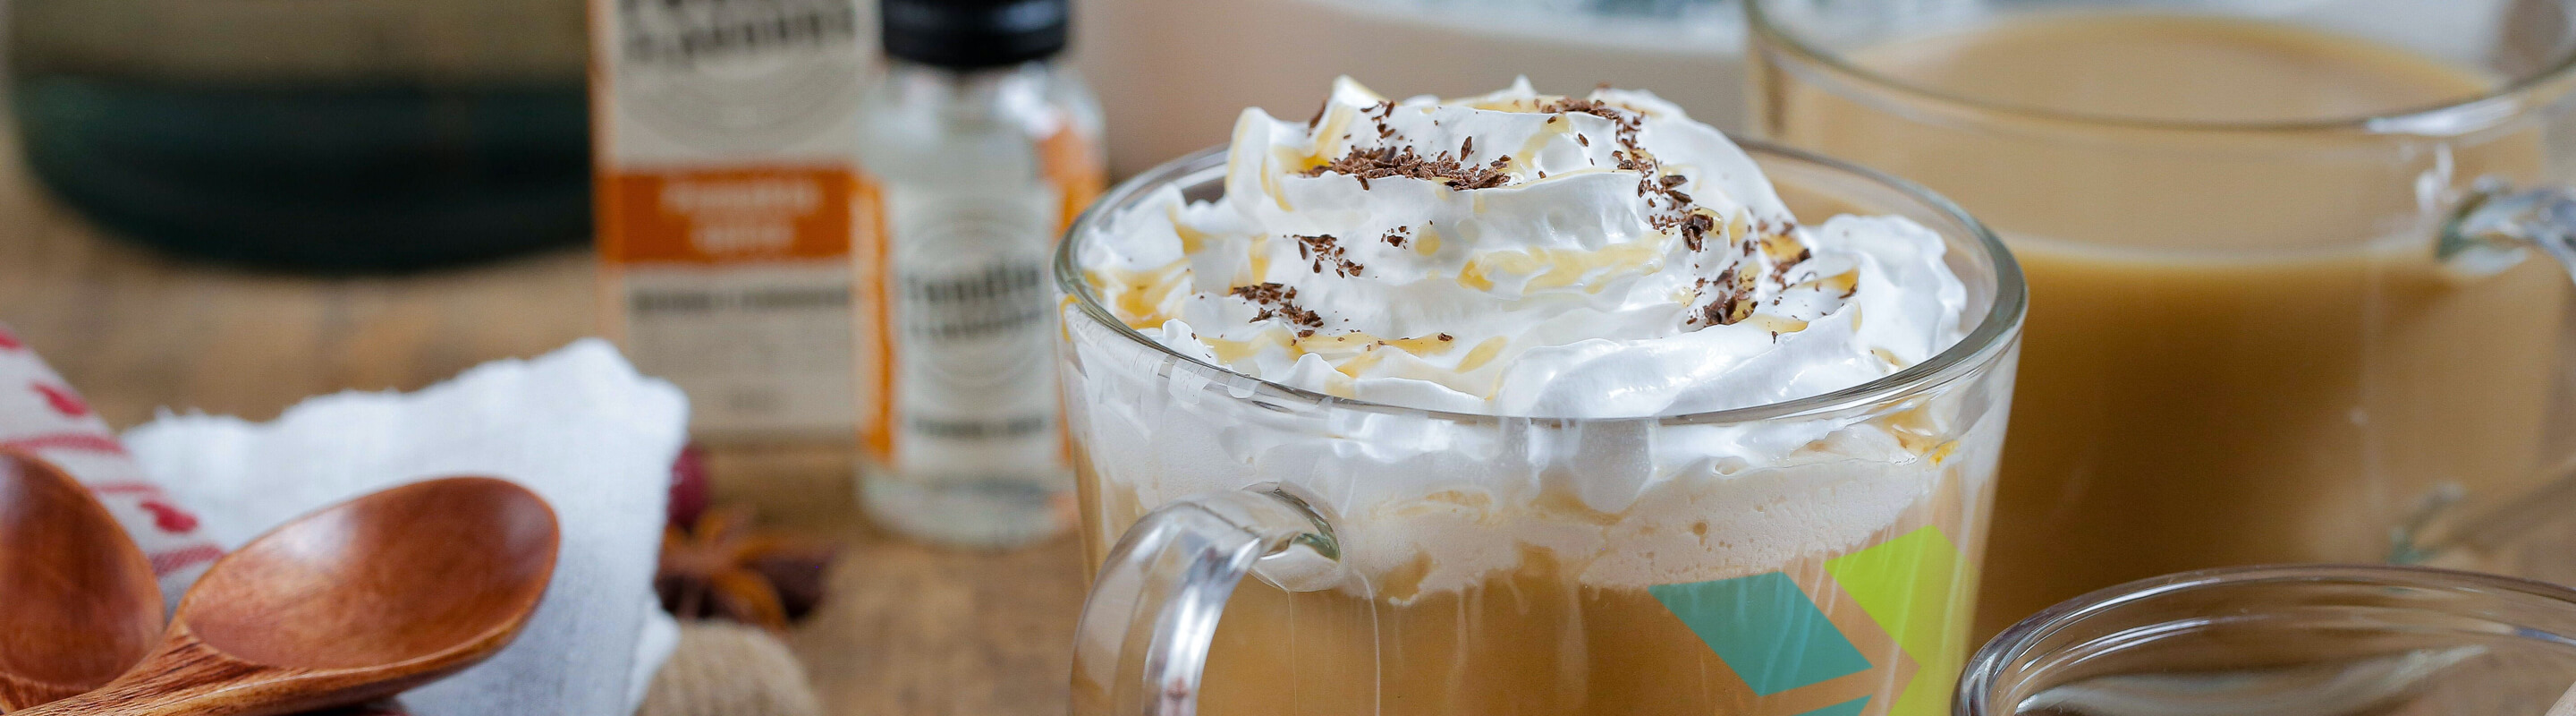 How to Make Your Own Pumpkin Spice Latte